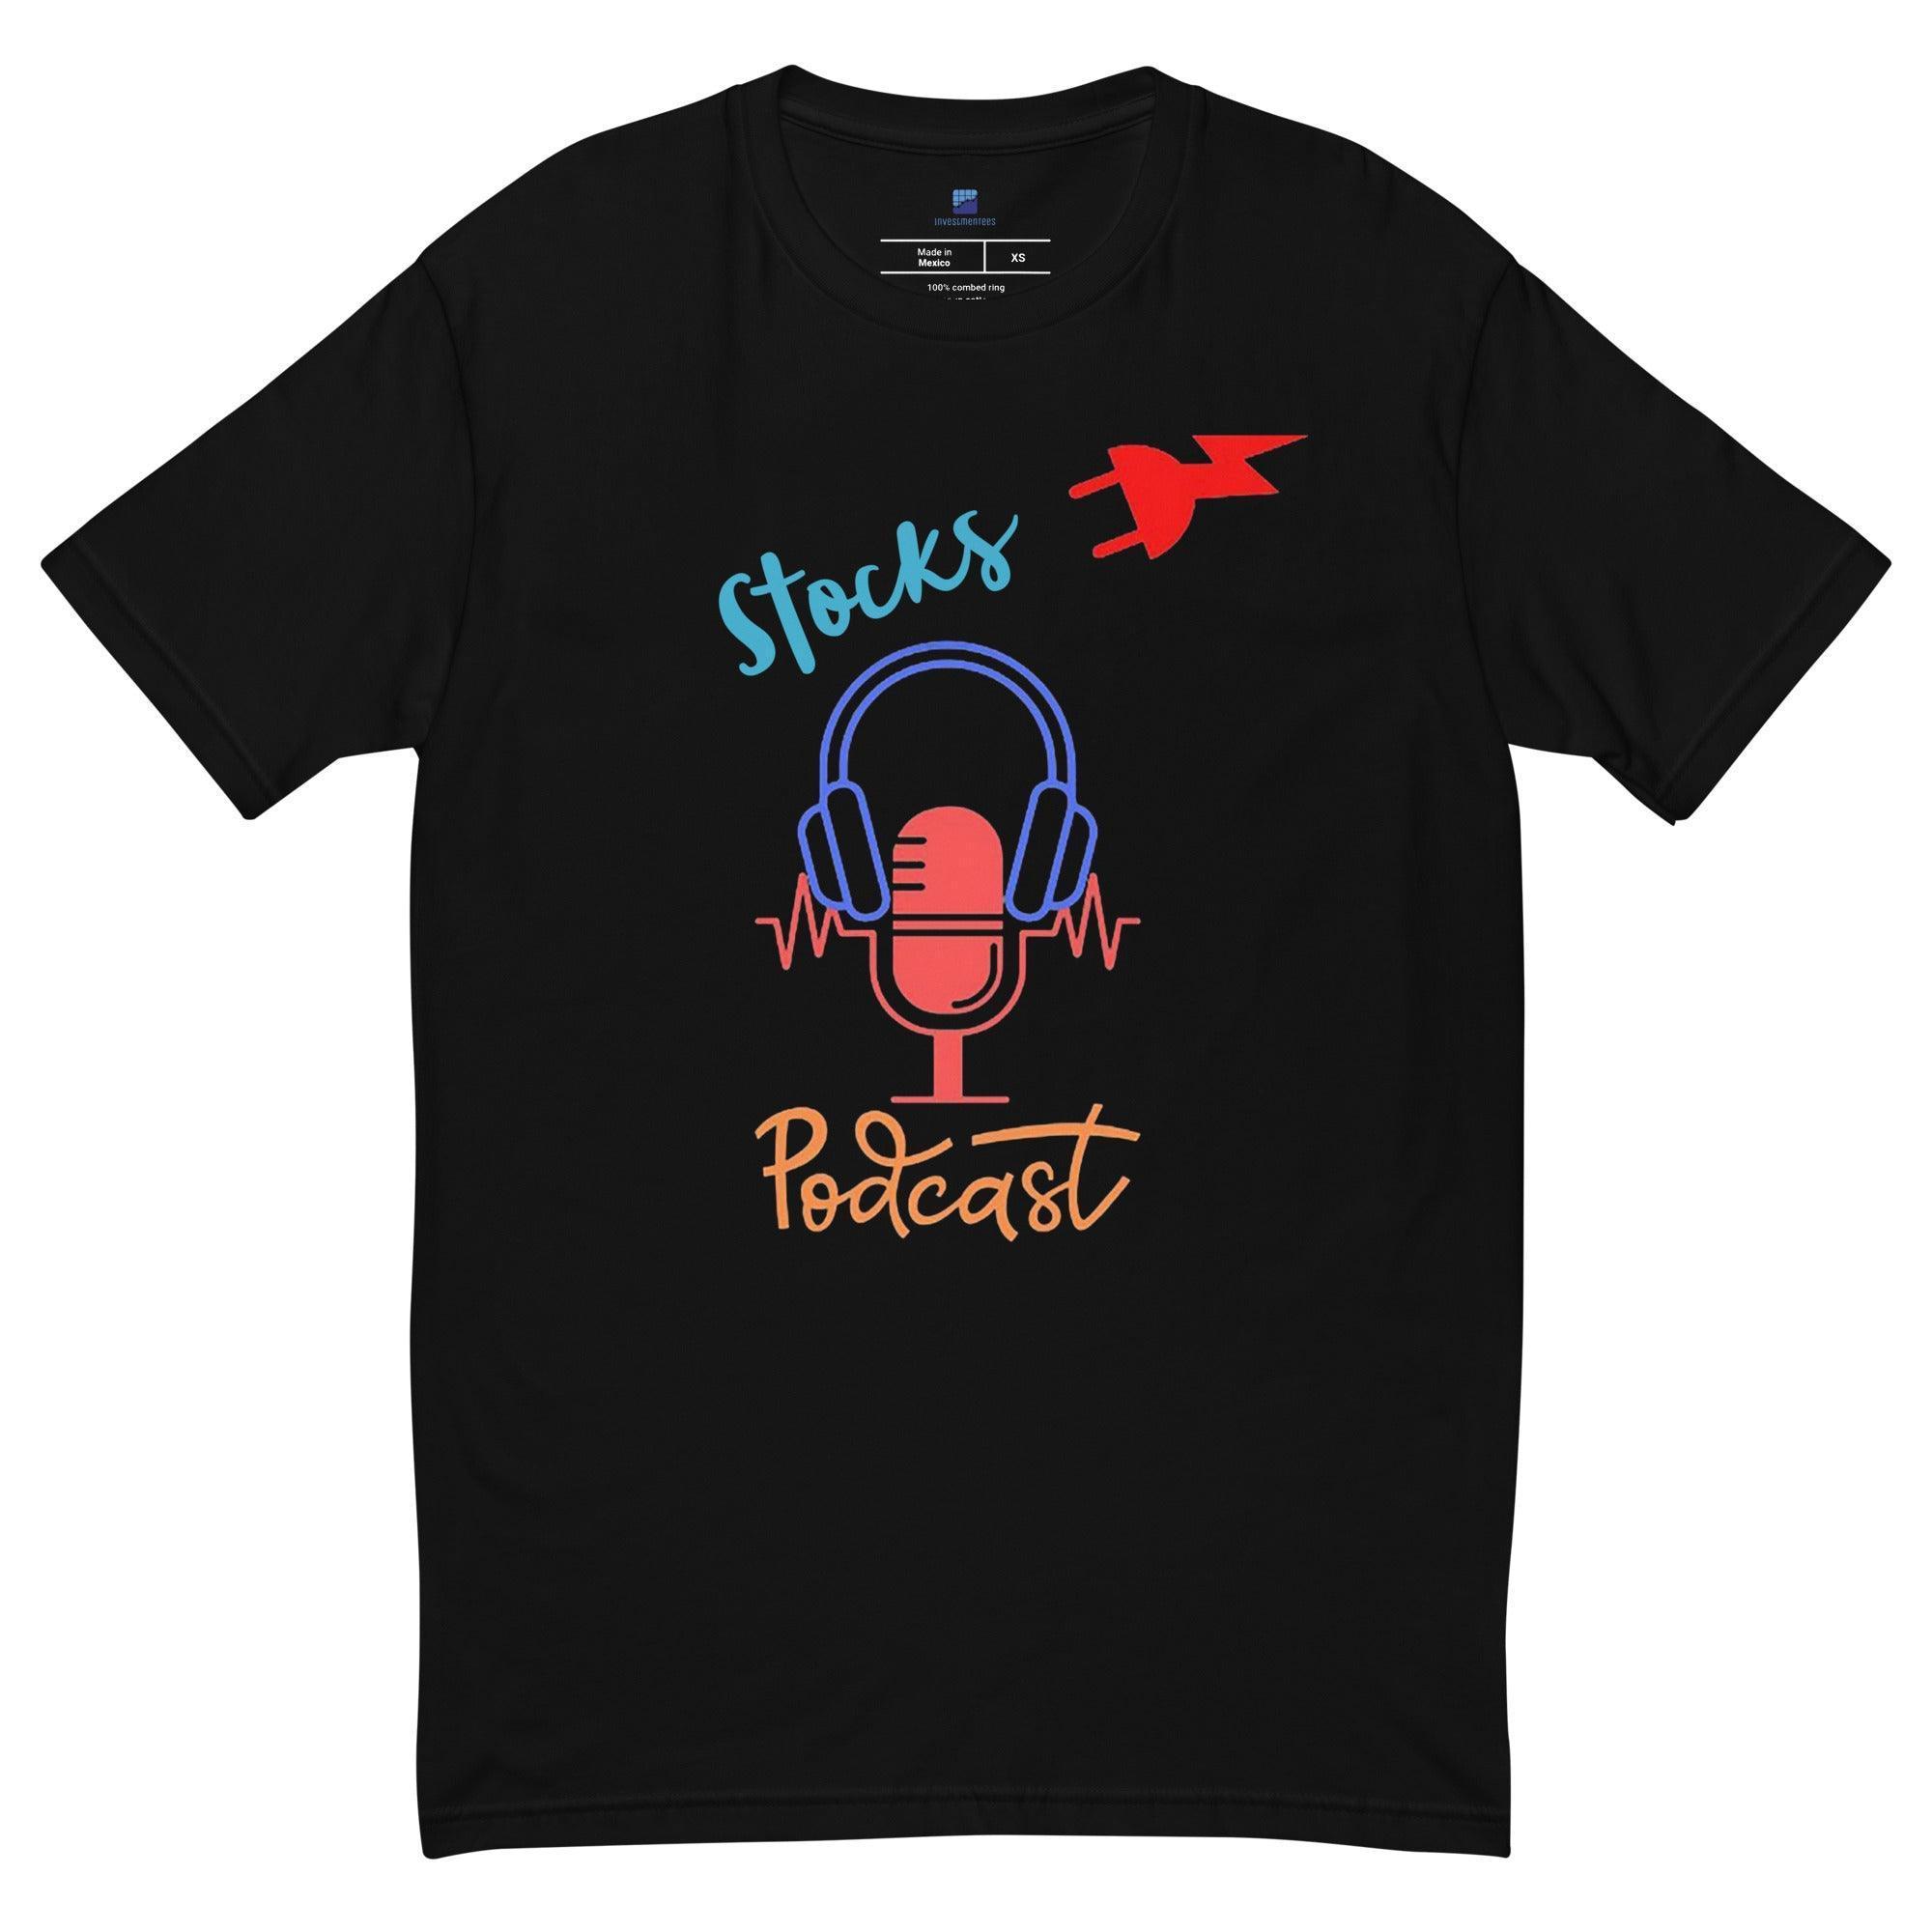 Stocks Podcast T-Shirt - InvestmenTees